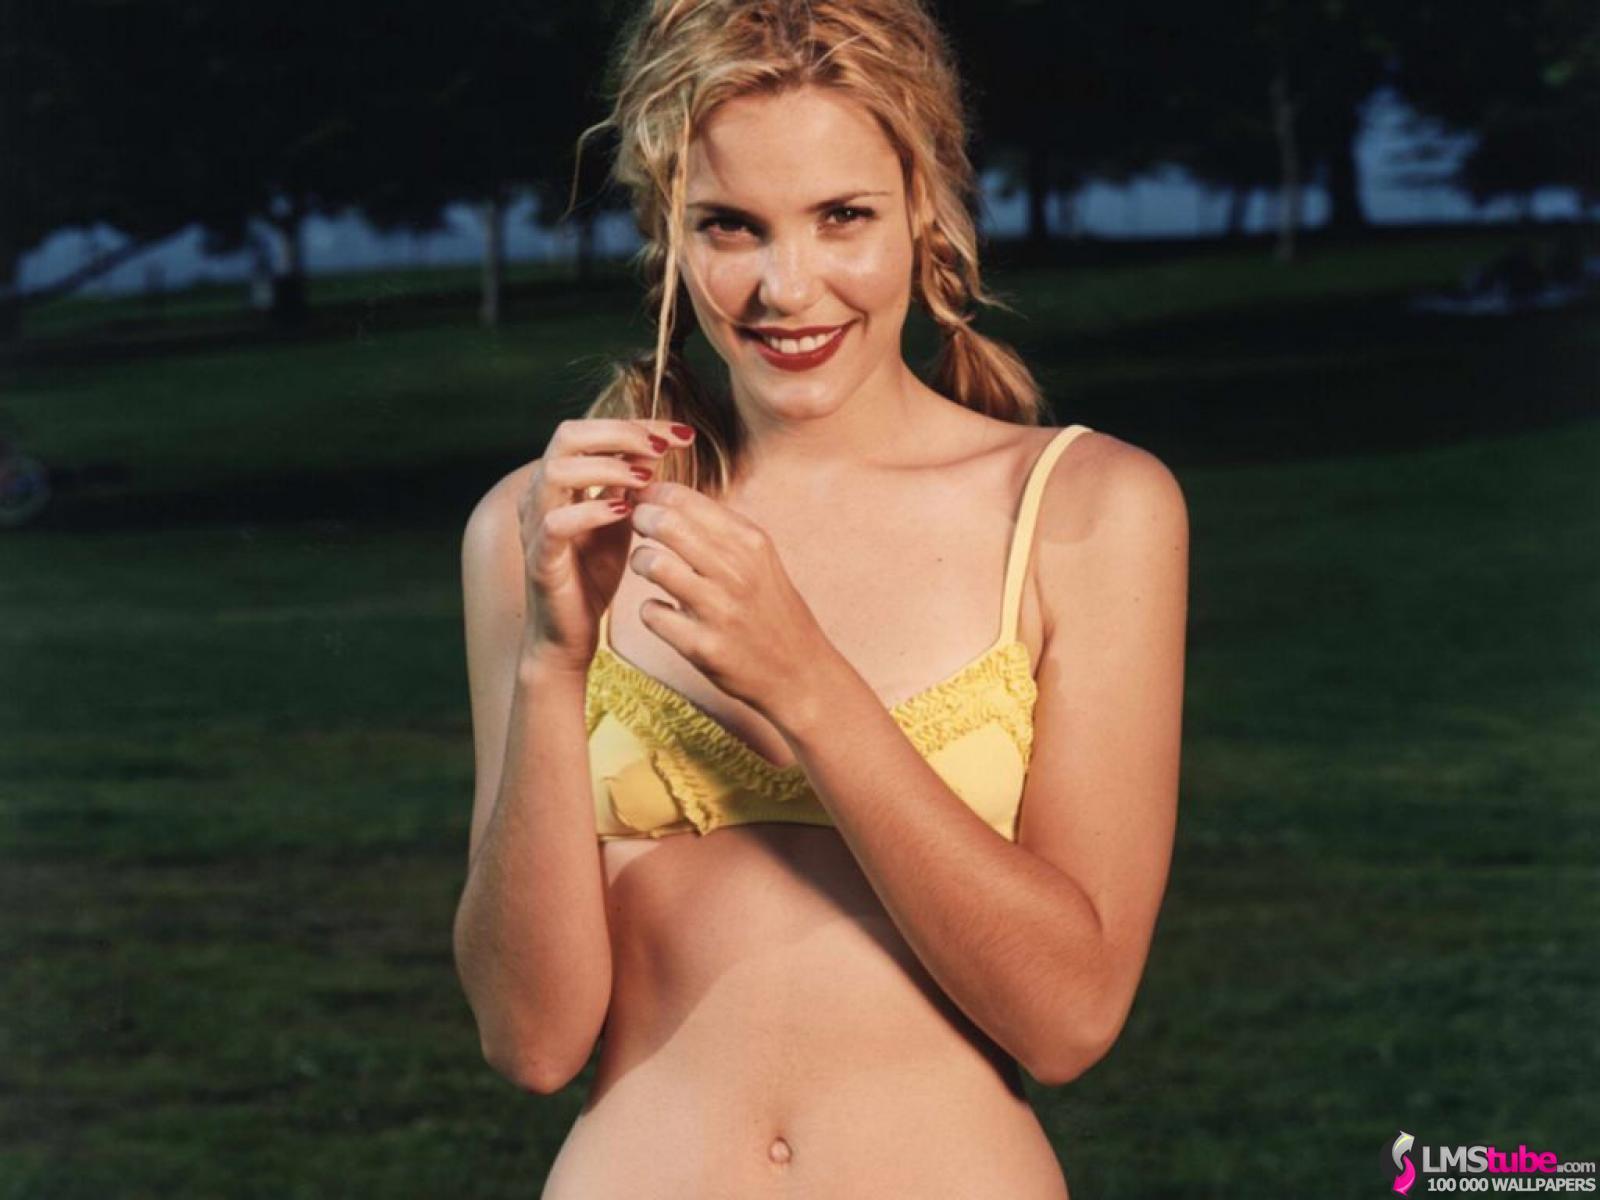 60+ Hot Pictures Of Leslie Bibb Which Will Make Your Day | Best Of Comic Books